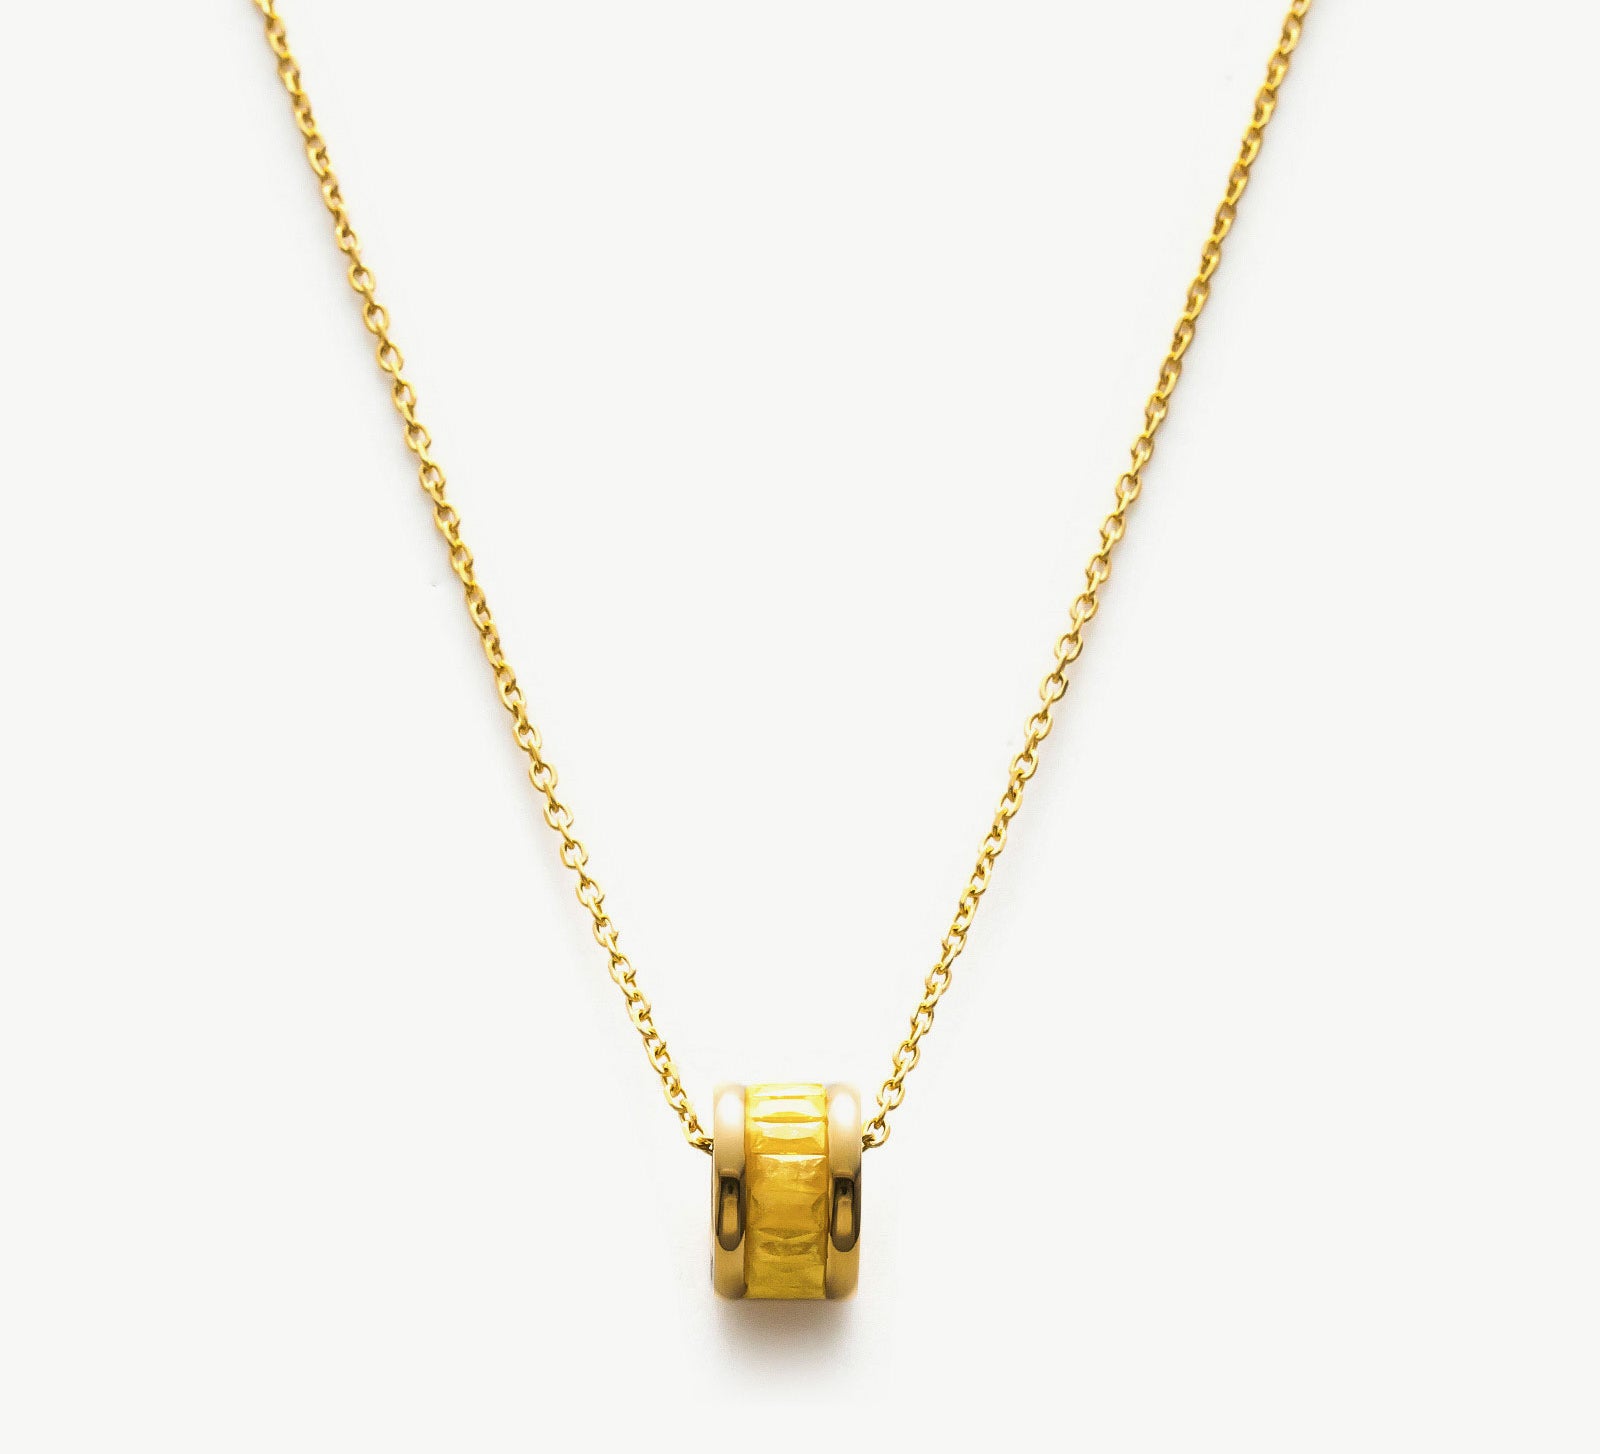 Yellow Ring Pendant Chain Necklace, a symbol of sunshine radiance, featuring a vibrant yellow ring pendant suspended from a delicate chain, creating a cheerful and eye-catching accessory for any occasion